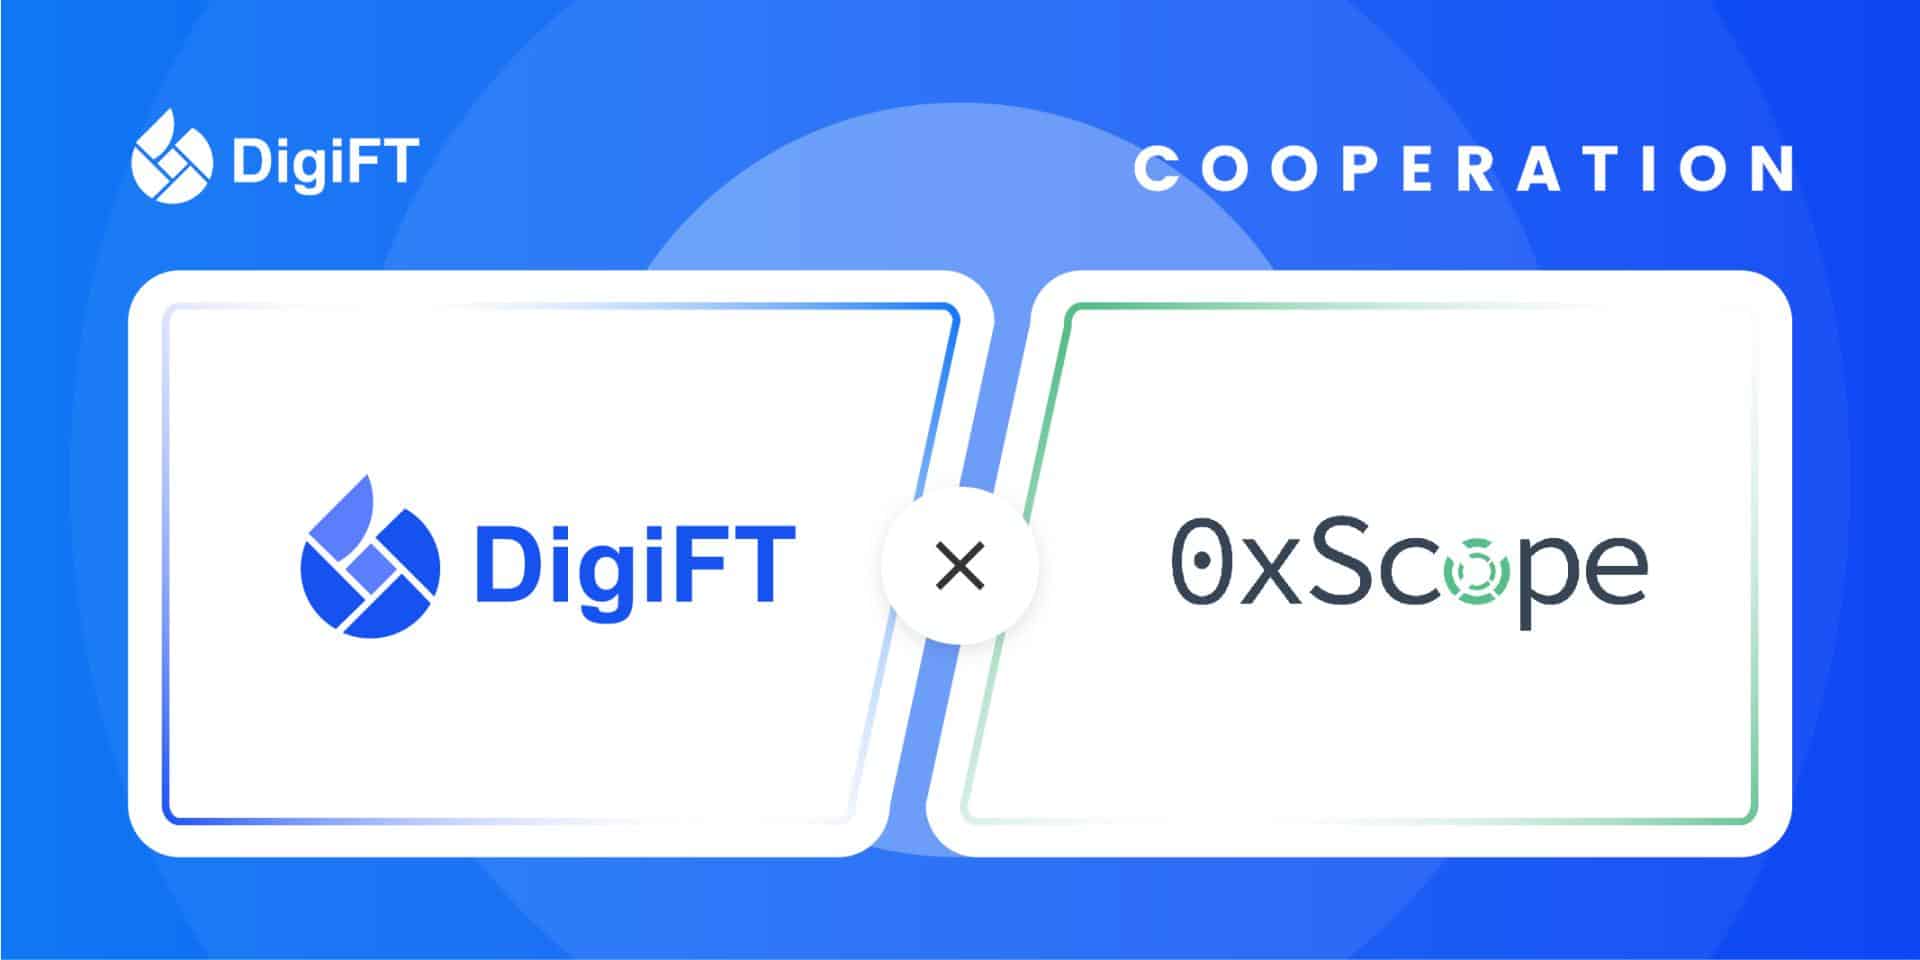 Digift-and-0xscope-to-develop-defi-market-monitoring-and-surveillance-applications